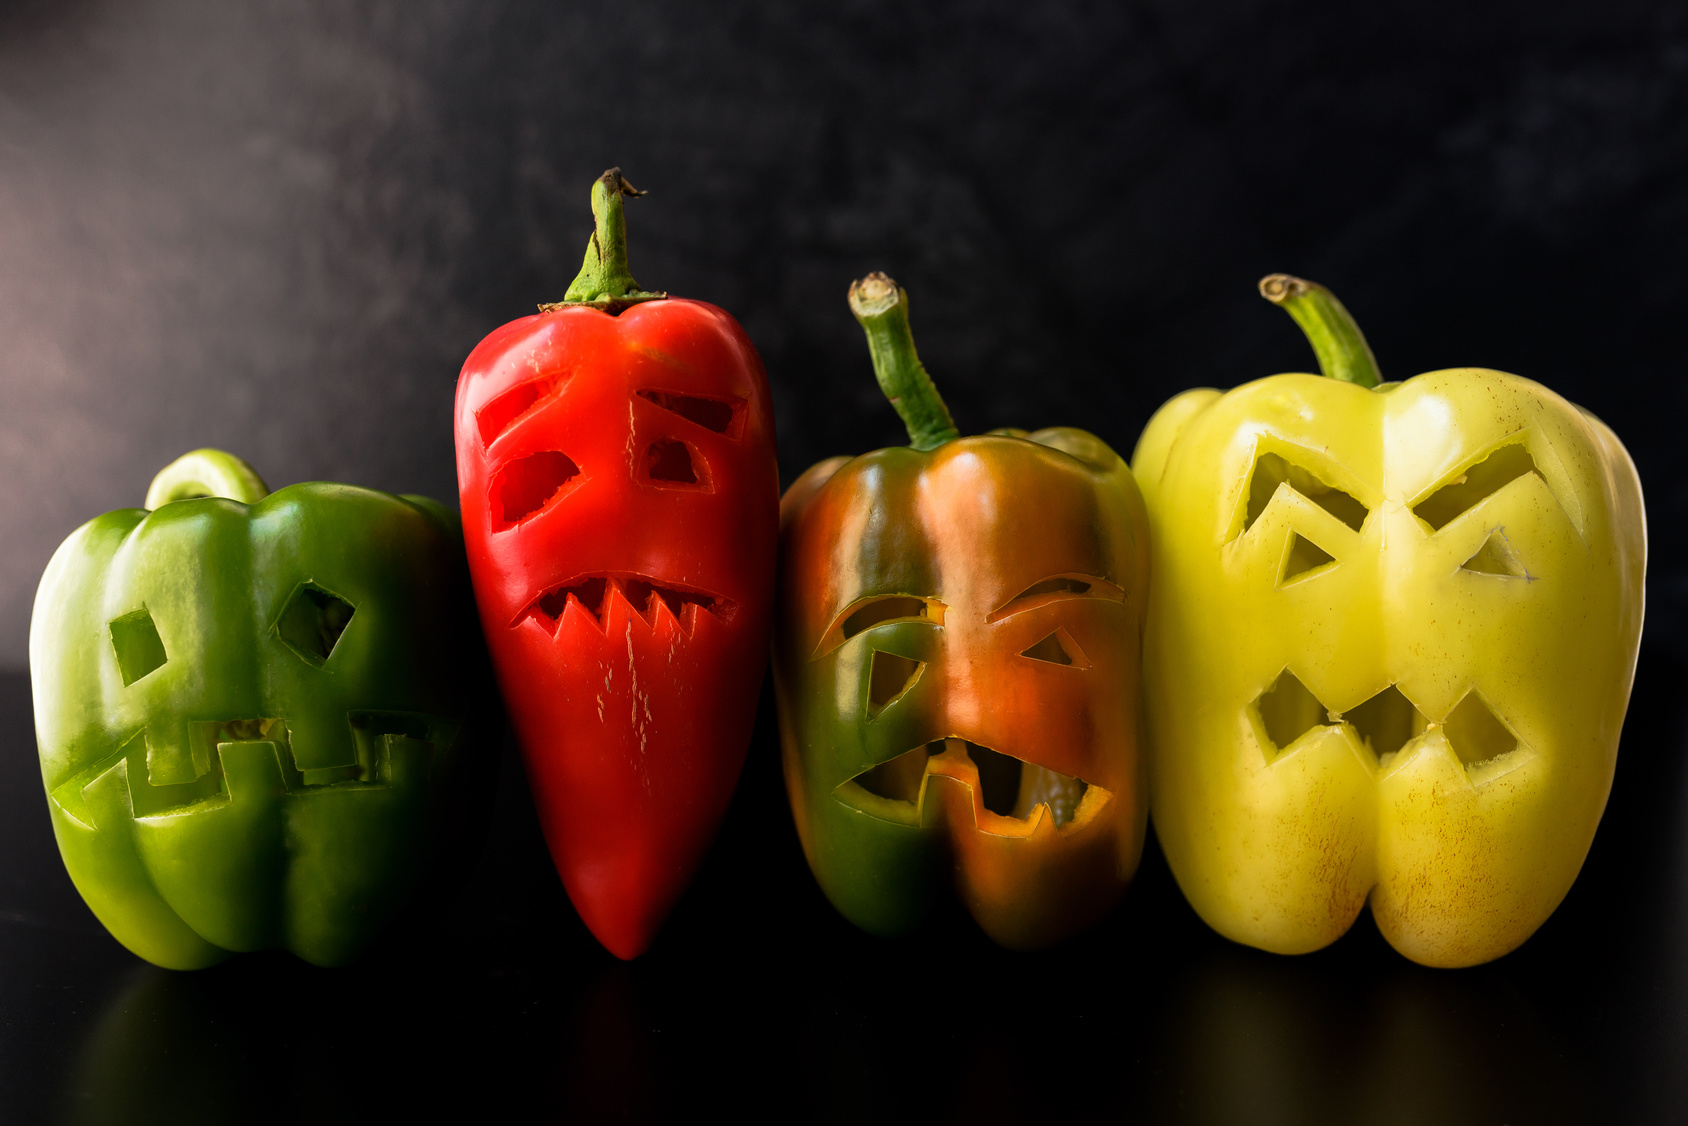 Halloween theme. Halloween peppers with scary faces.